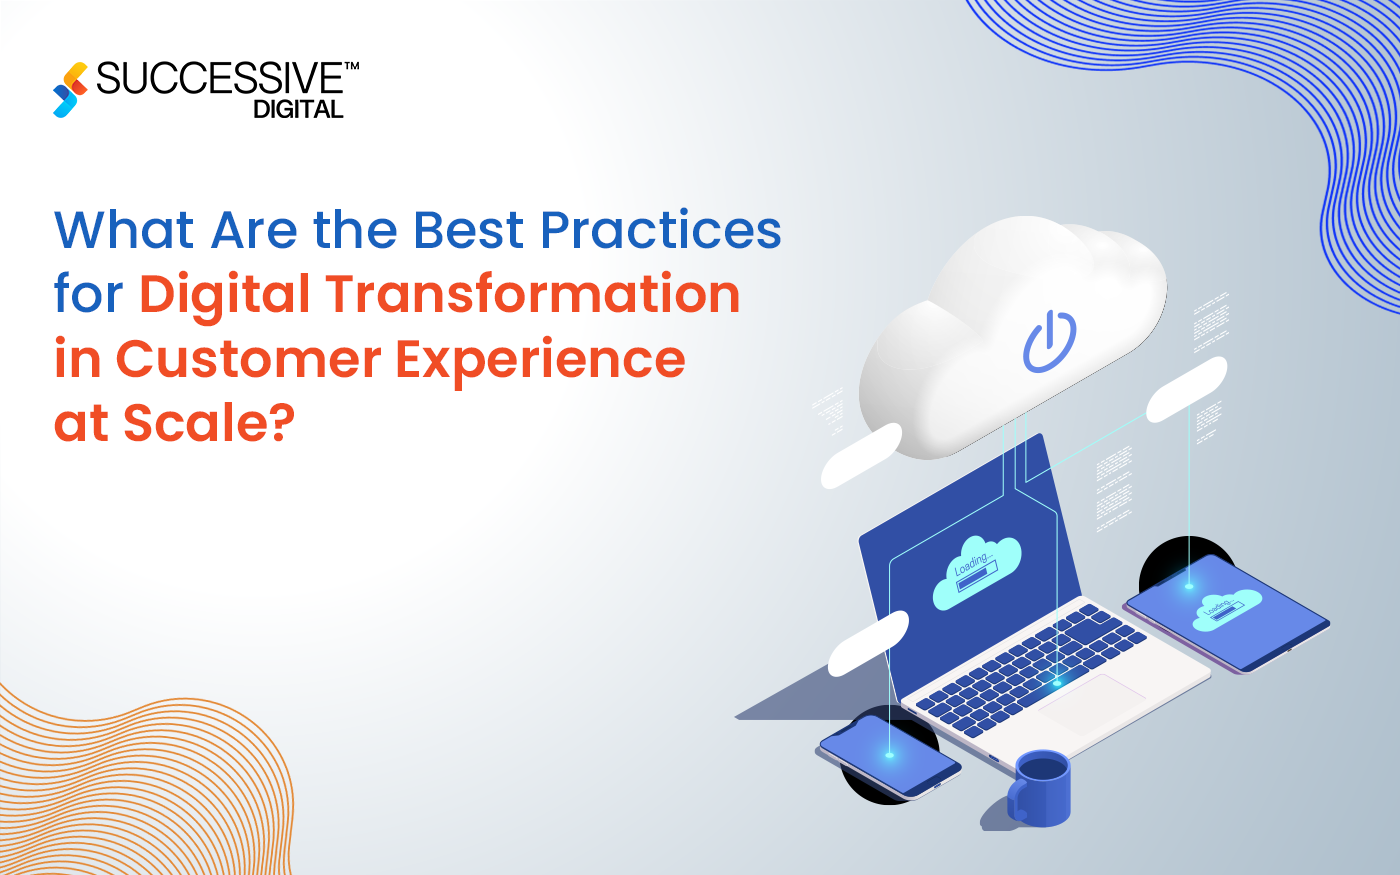 What Are the Best Practices for Digital Transformation in Customer Experience at Scale?